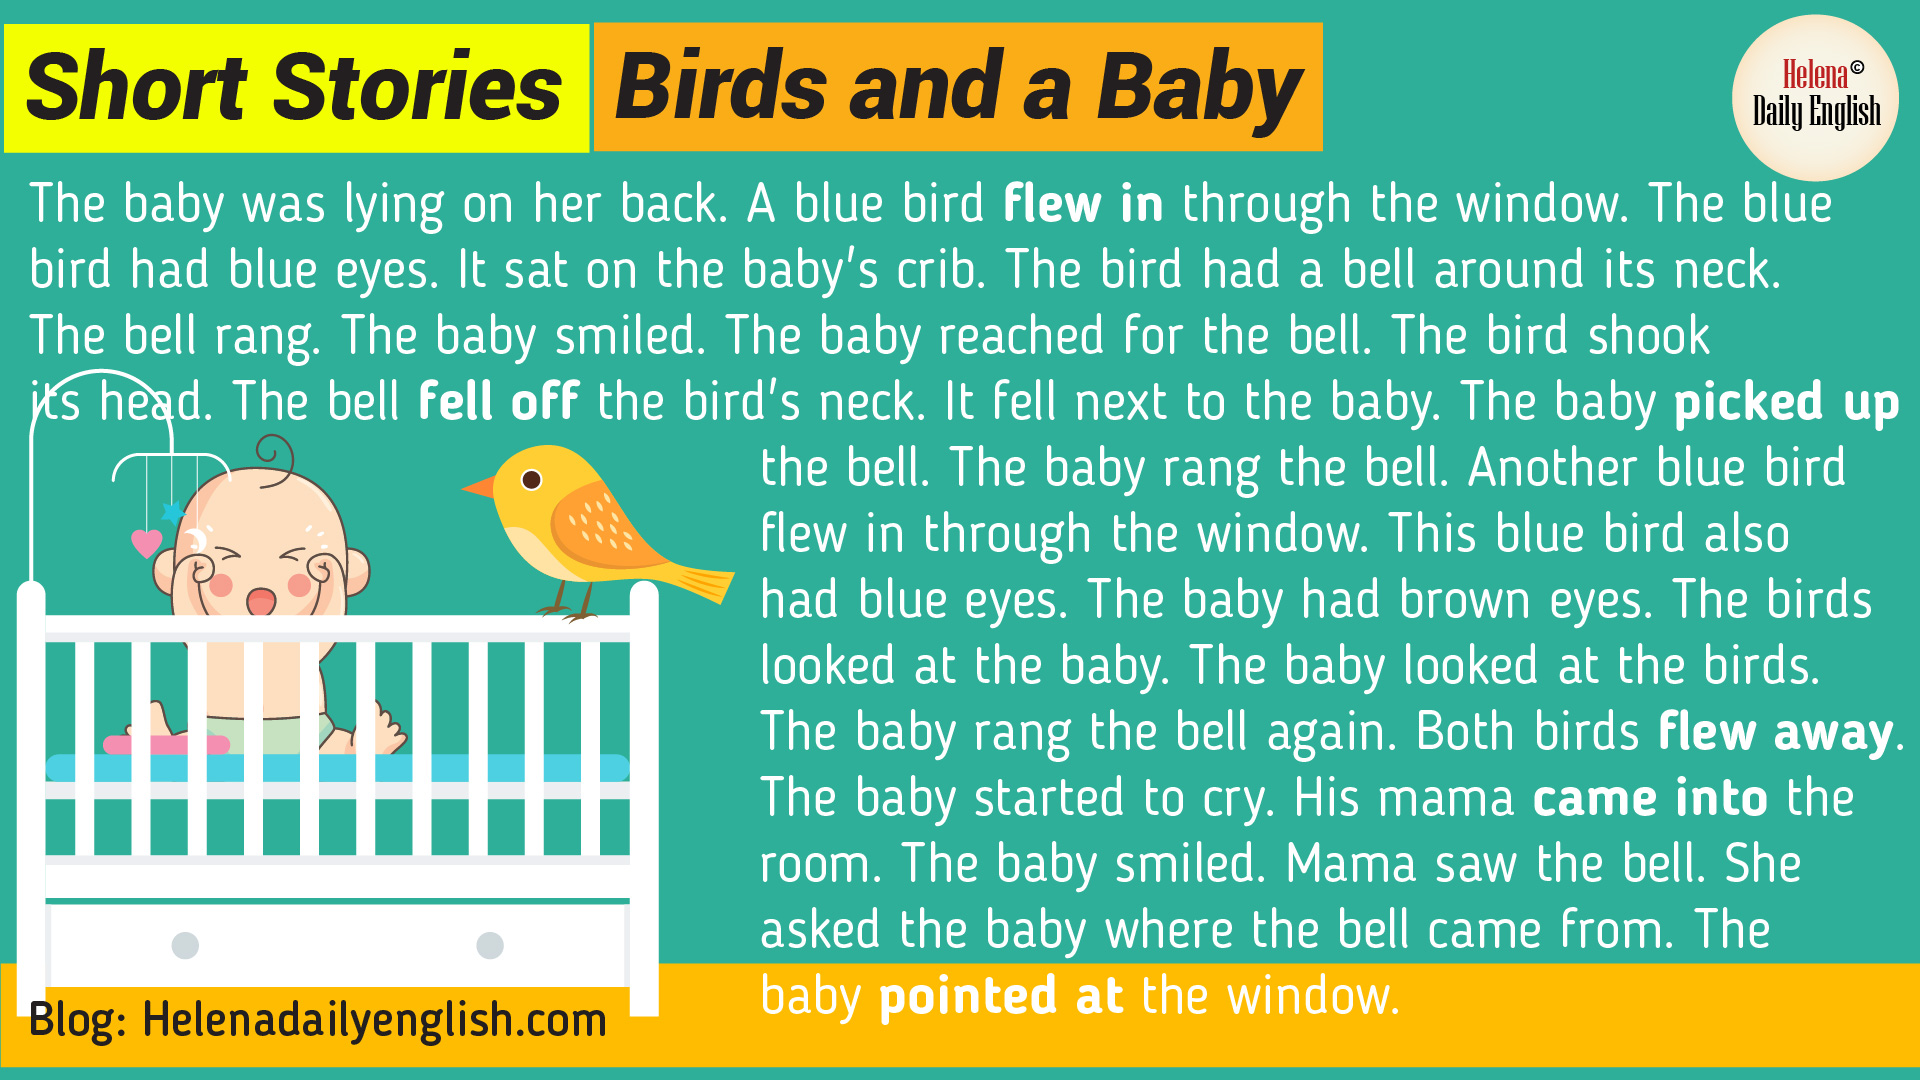 Short Stories in English: Birds and a Baby